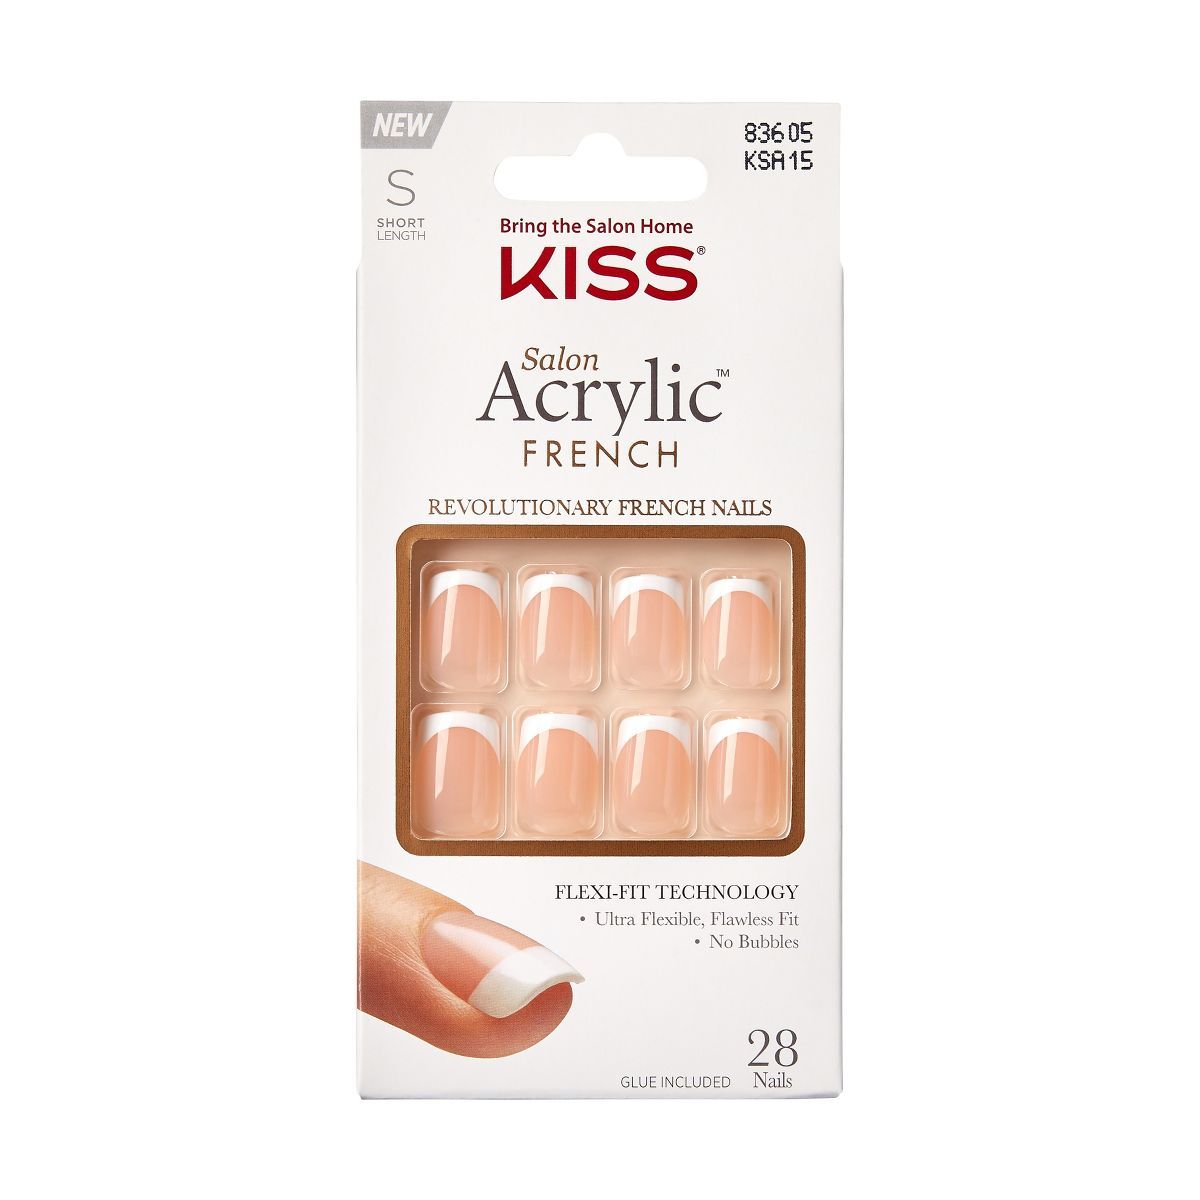 KISS Products Salon Acrylic Short Square French Manicure Fake Nails Kit - Bonjour - 33ct | Target